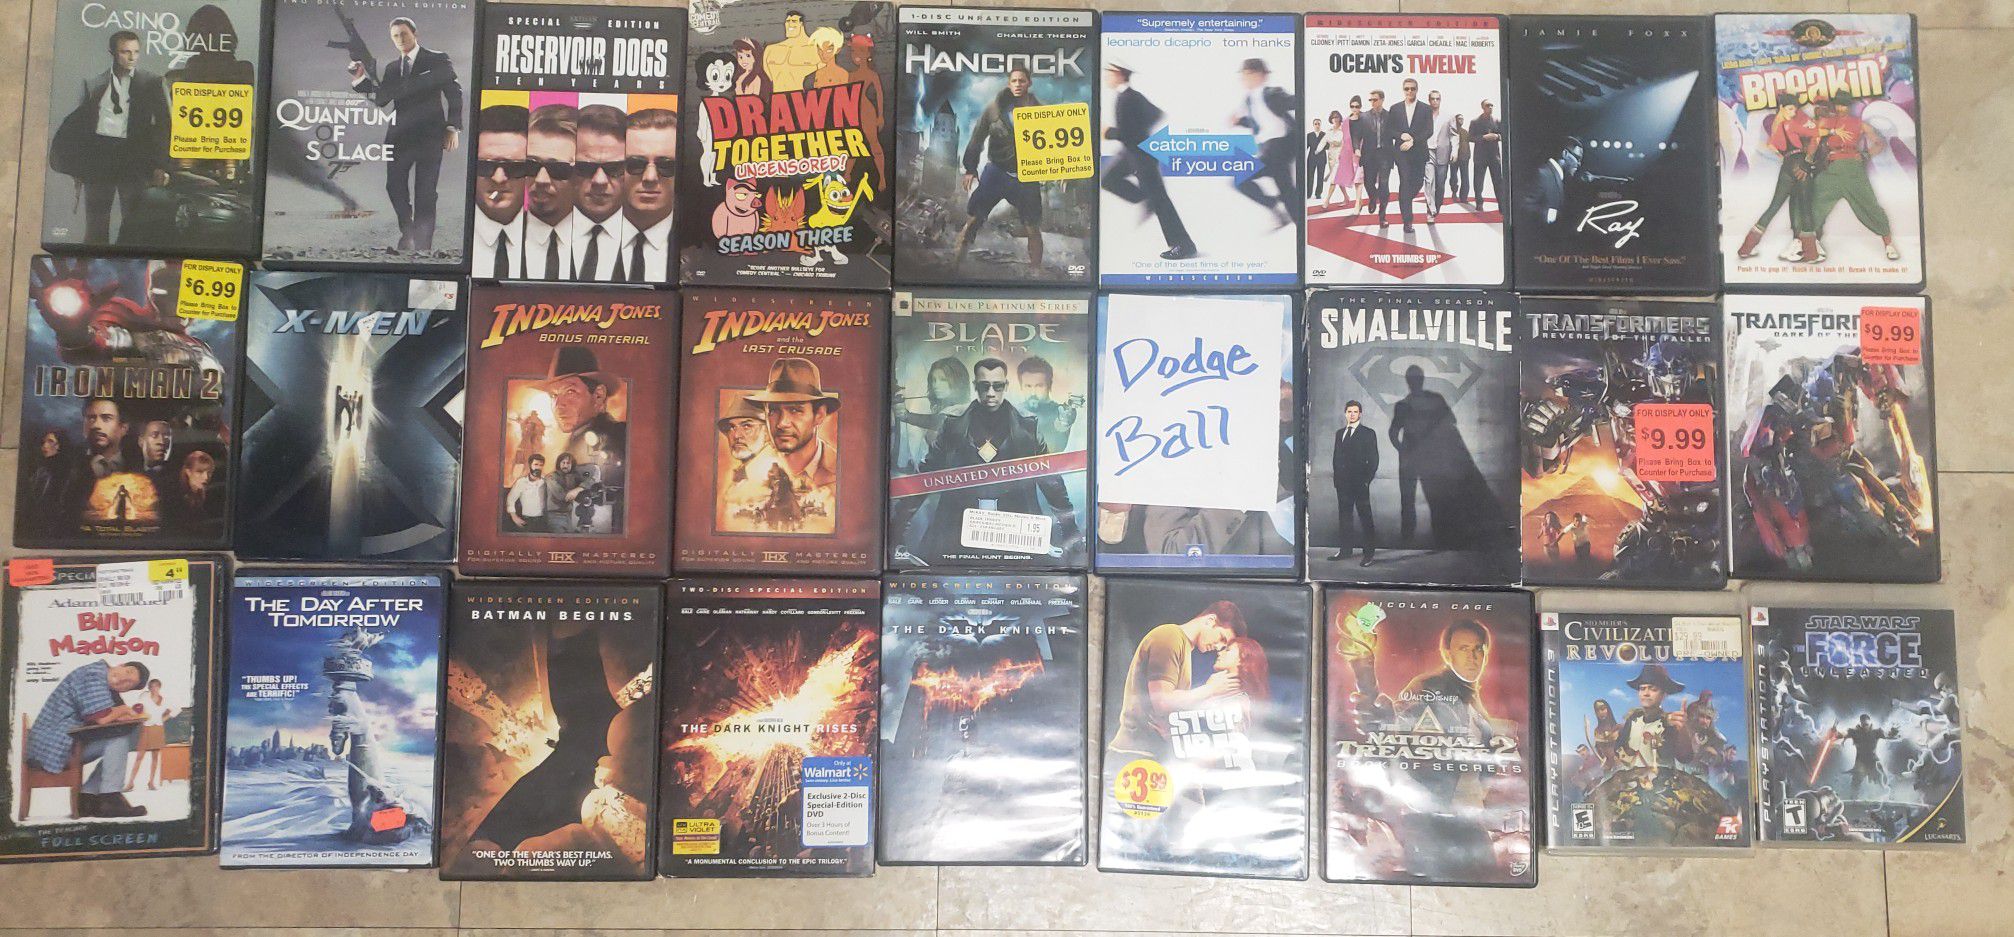 Super cheap DVDs, TV series, Playstation 3 game